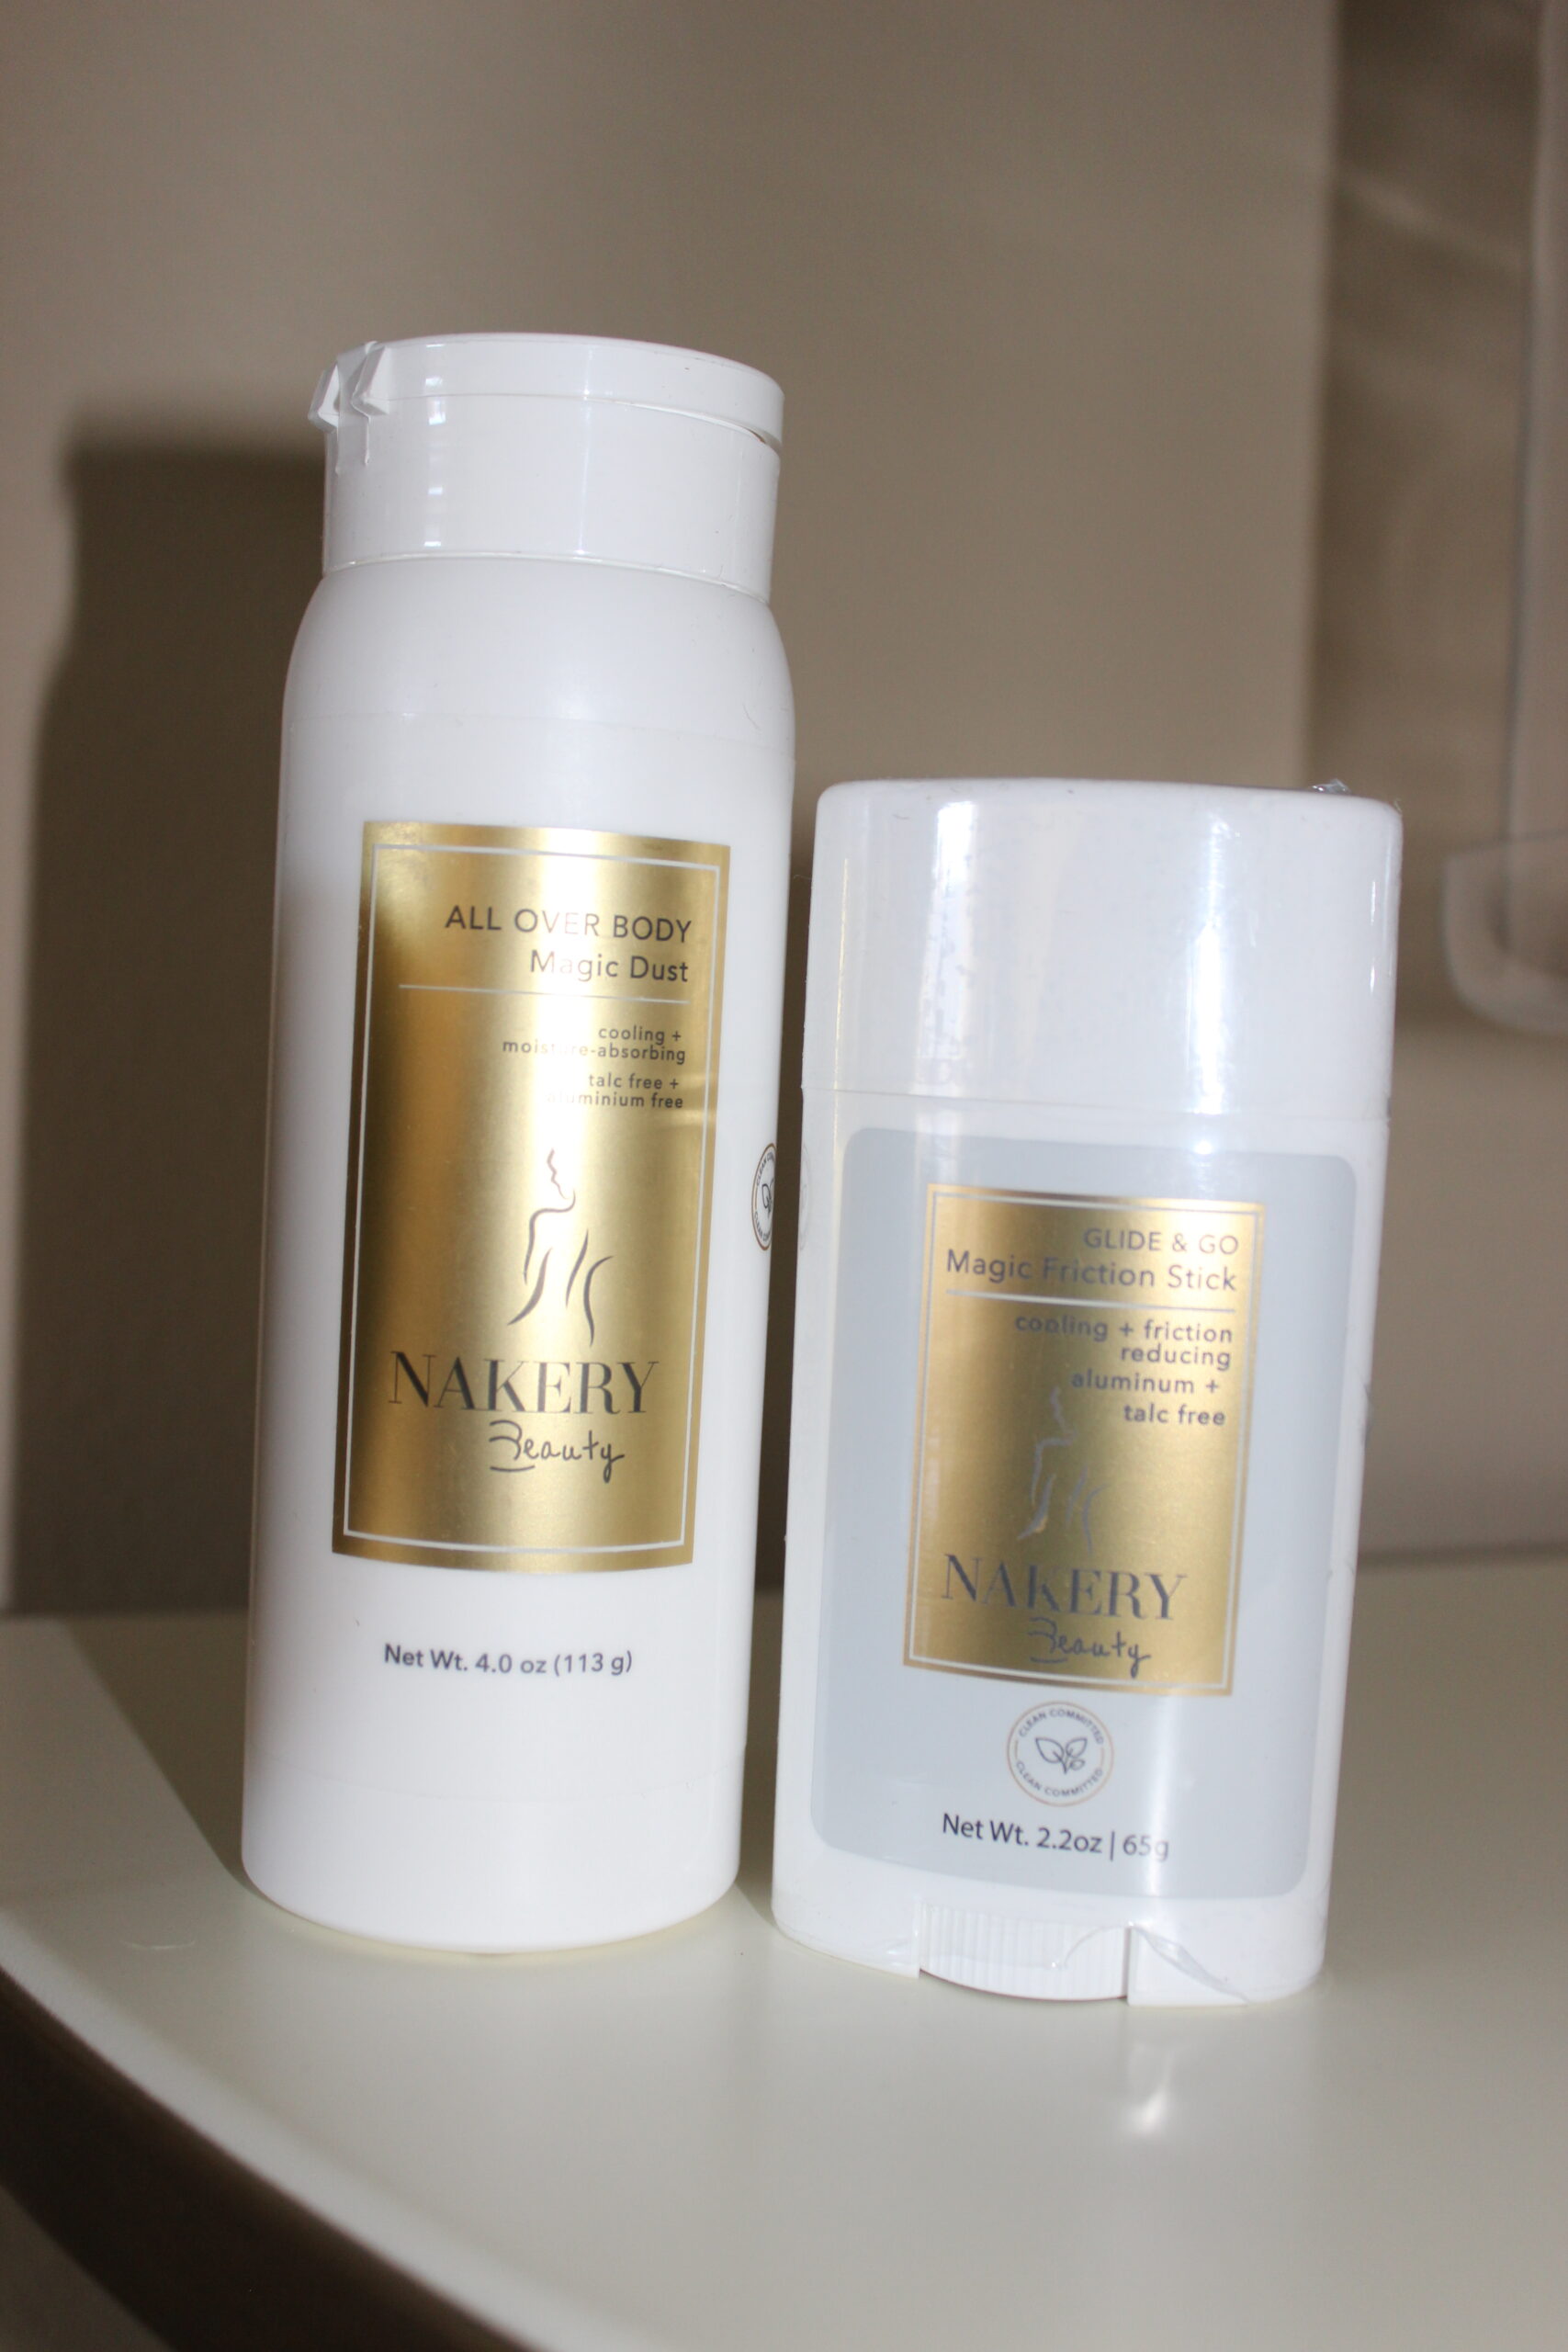 Nakery Beauty: Body Care to Tackle Daily Skincare Needs